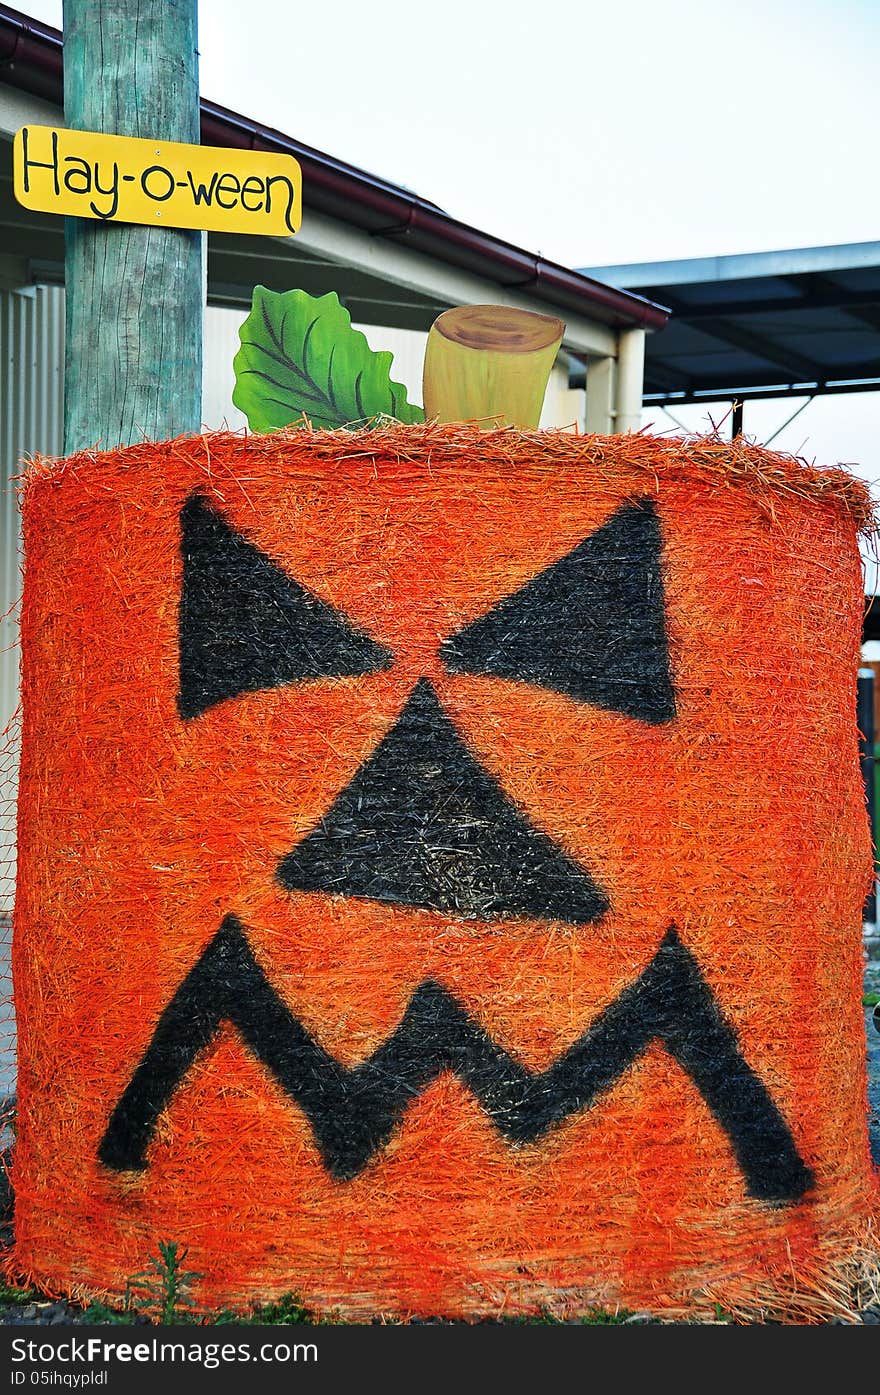 A comical and creative large roadside halloween painted hay bale with the cranky expression of an orange pumpkin on the front and a sign Hay-o-ween. A comical and creative large roadside halloween painted hay bale with the cranky expression of an orange pumpkin on the front and a sign Hay-o-ween.